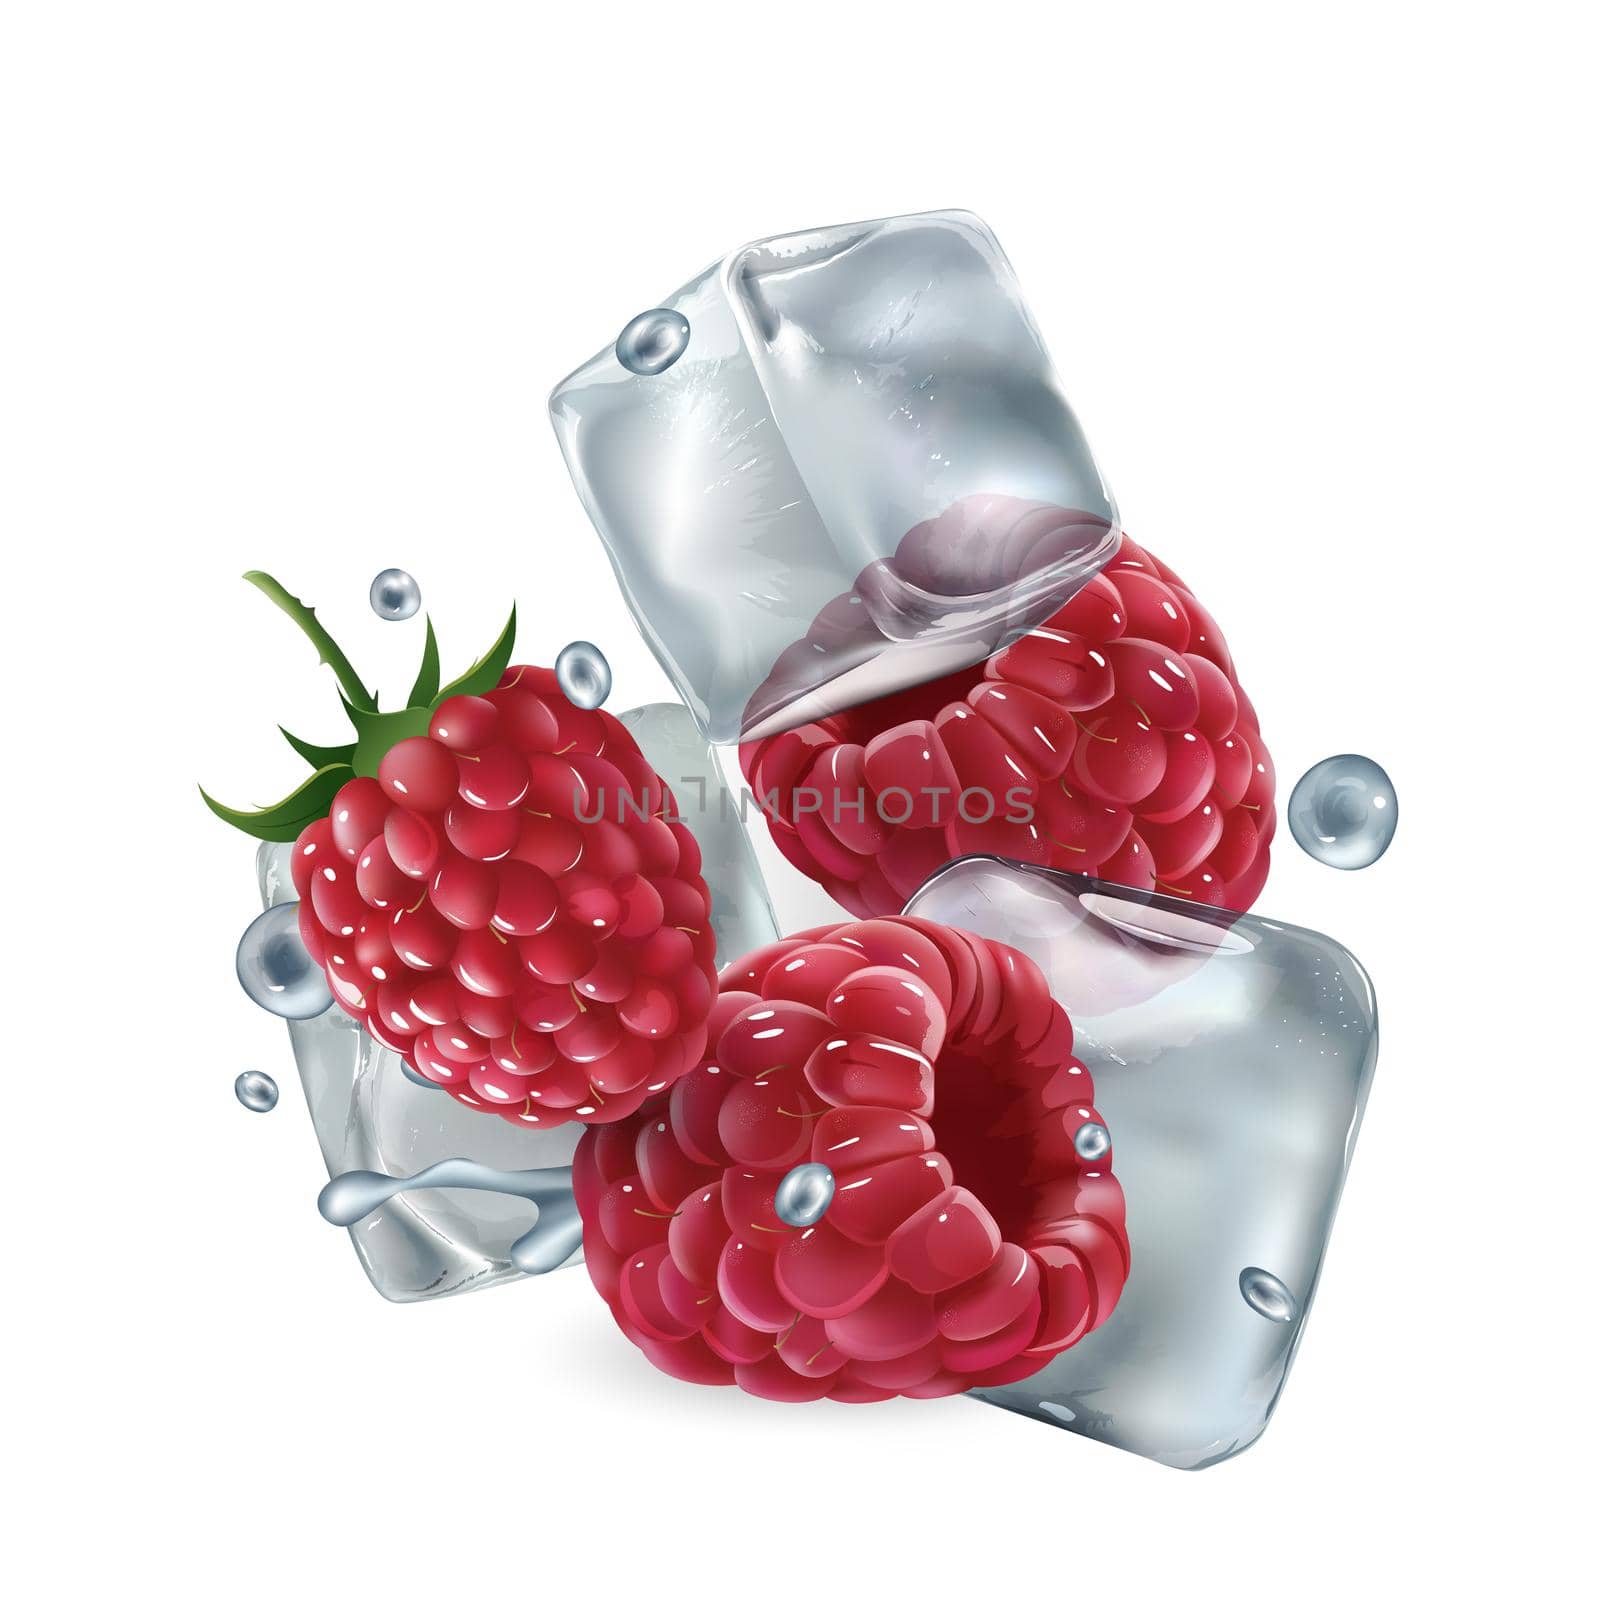 Fresh raspberries with ice cubes and water droplets by ConceptCafe